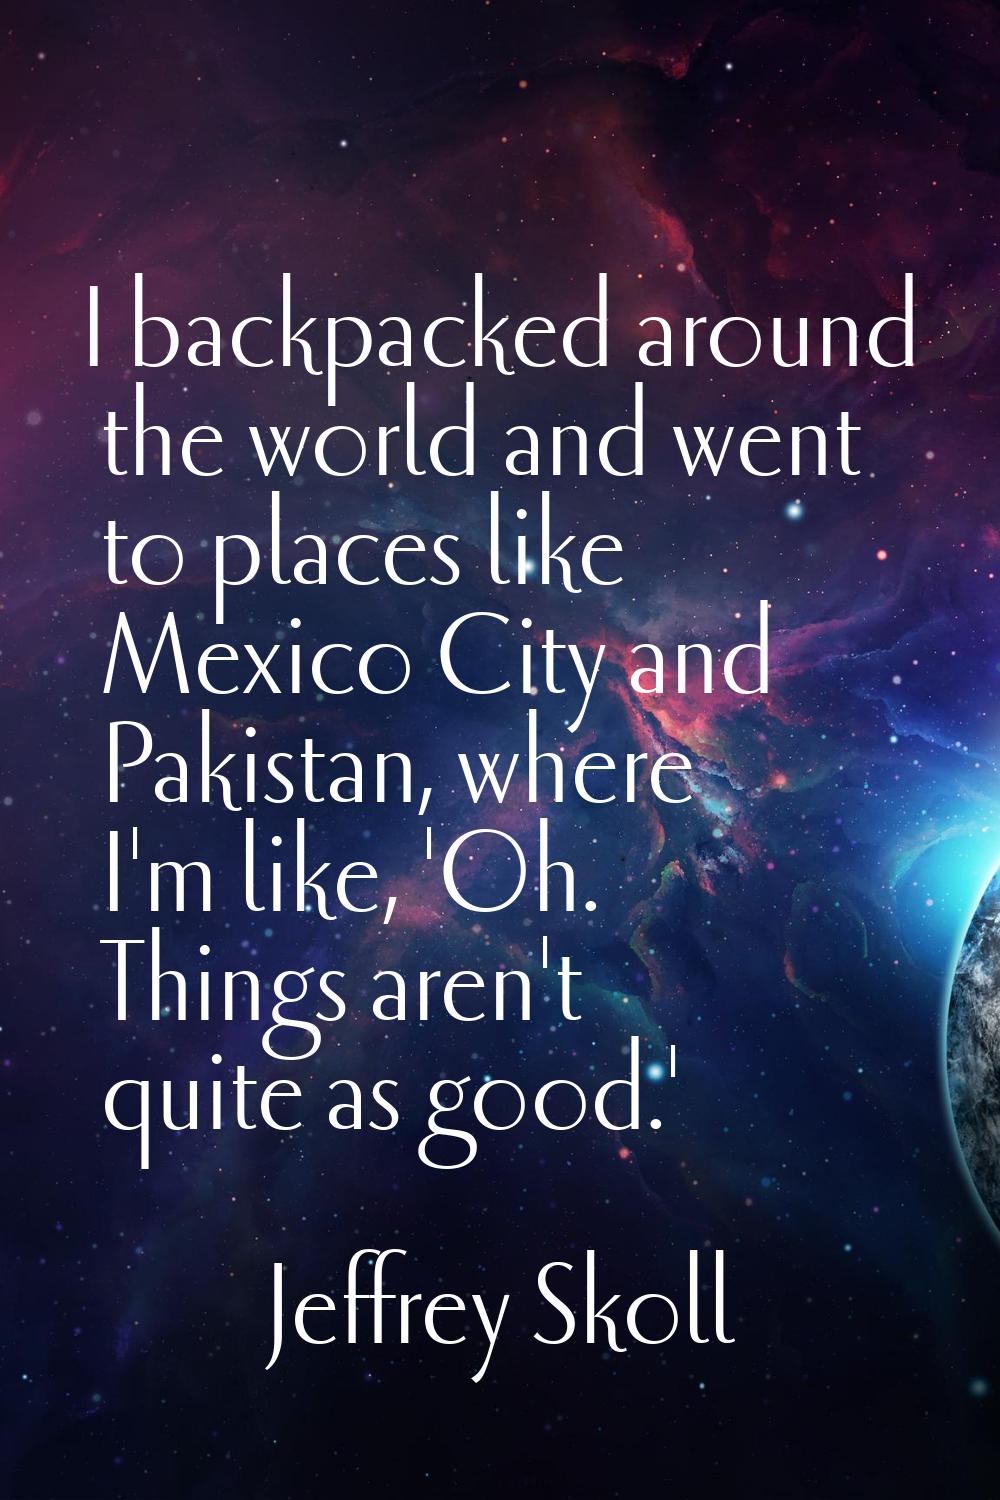 I backpacked around the world and went to places like Mexico City and Pakistan, where I'm like, 'Oh